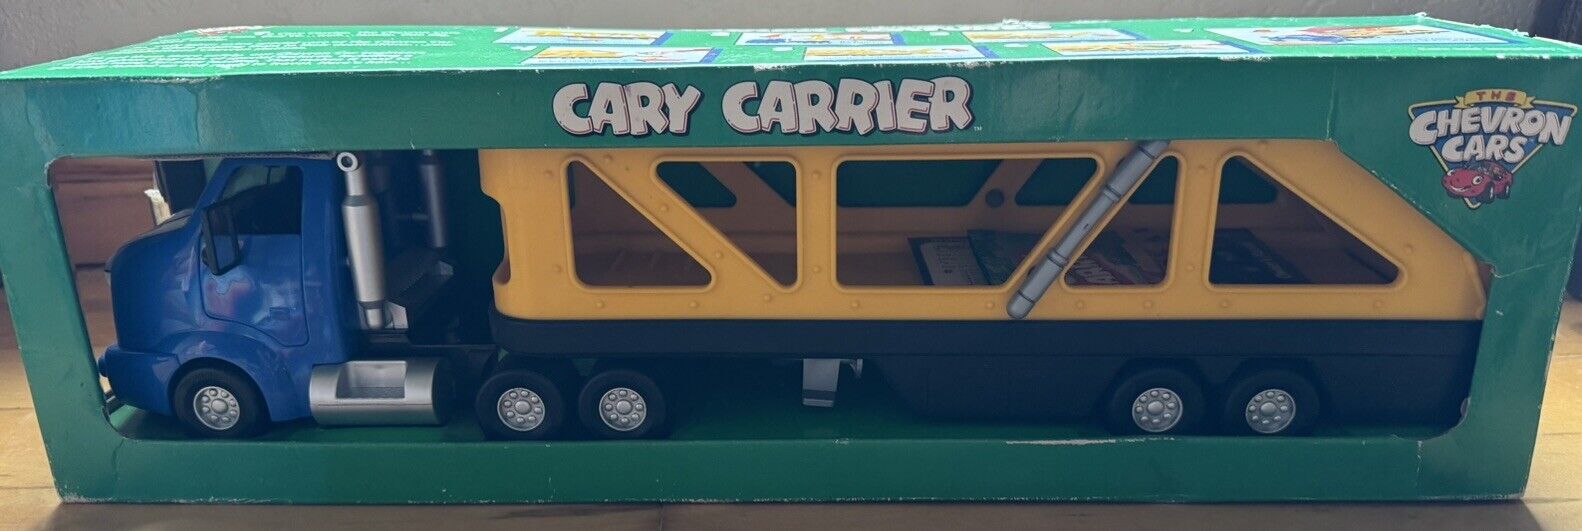 Vintage 1998 The Chevron Cars CARY CARRIER 715099299142.